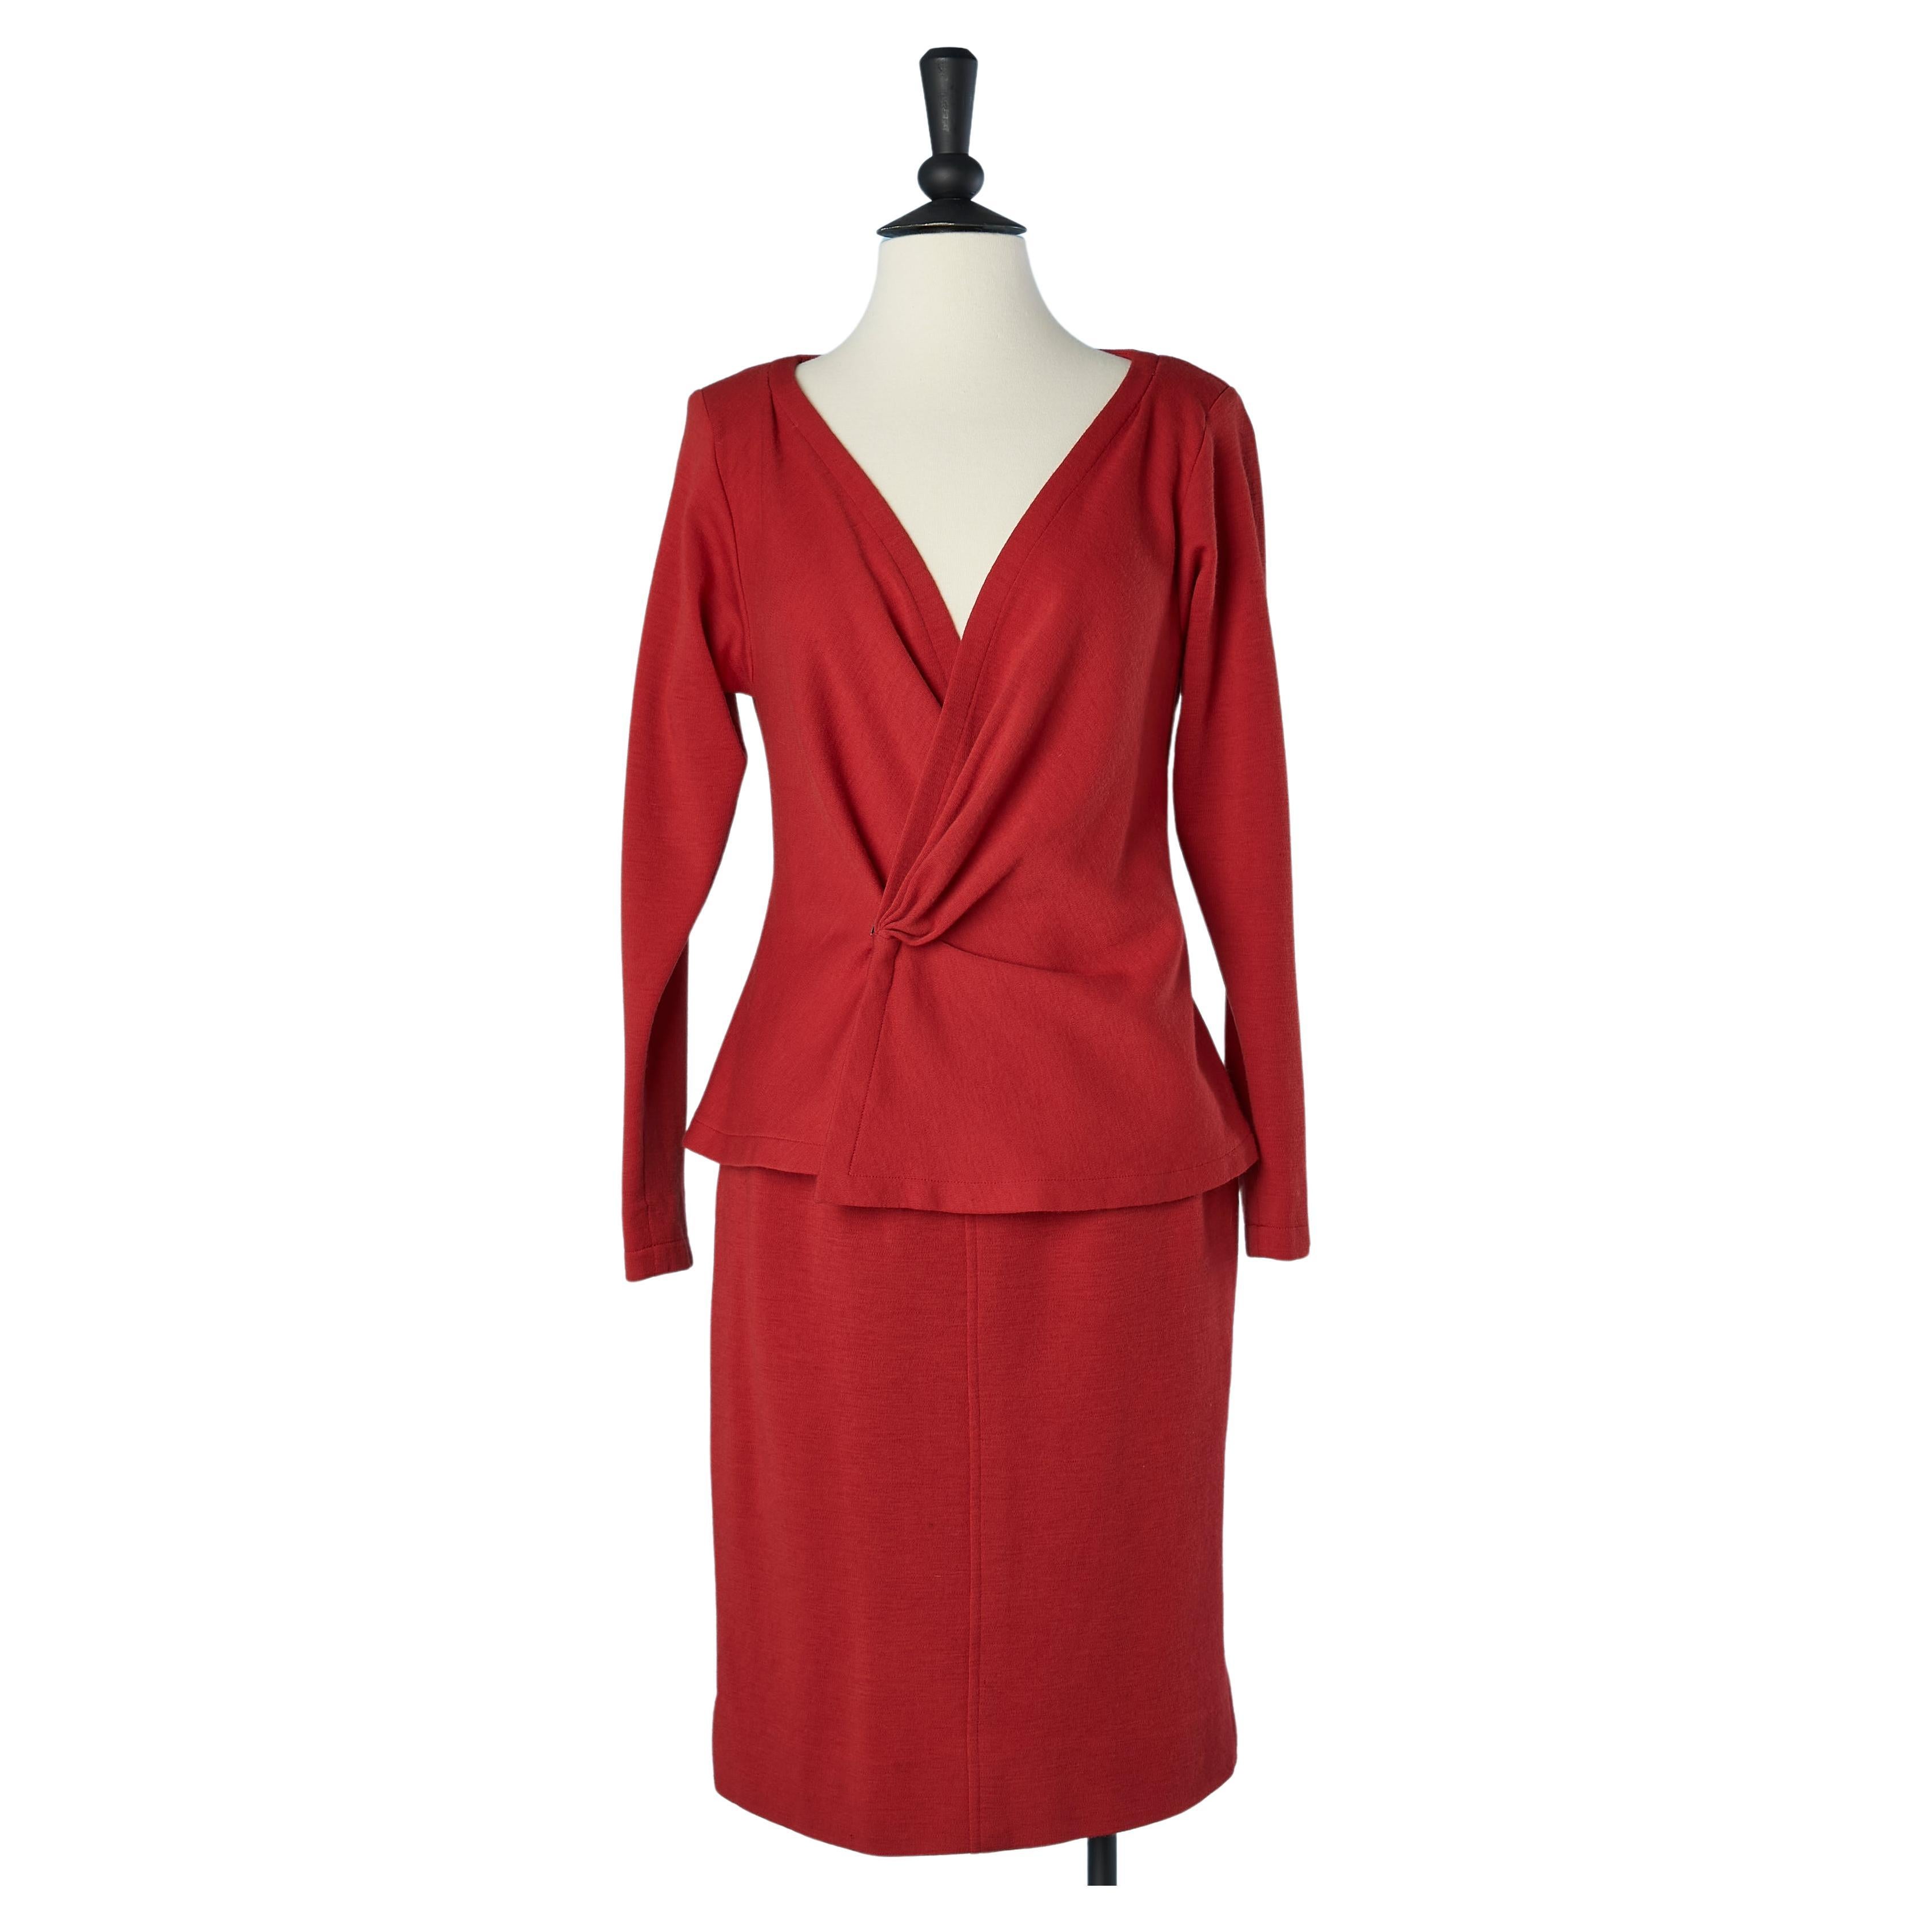 Wrap  and drape top in red wool jersey and skirt Saint Laurent Rive Gauche  For Sale